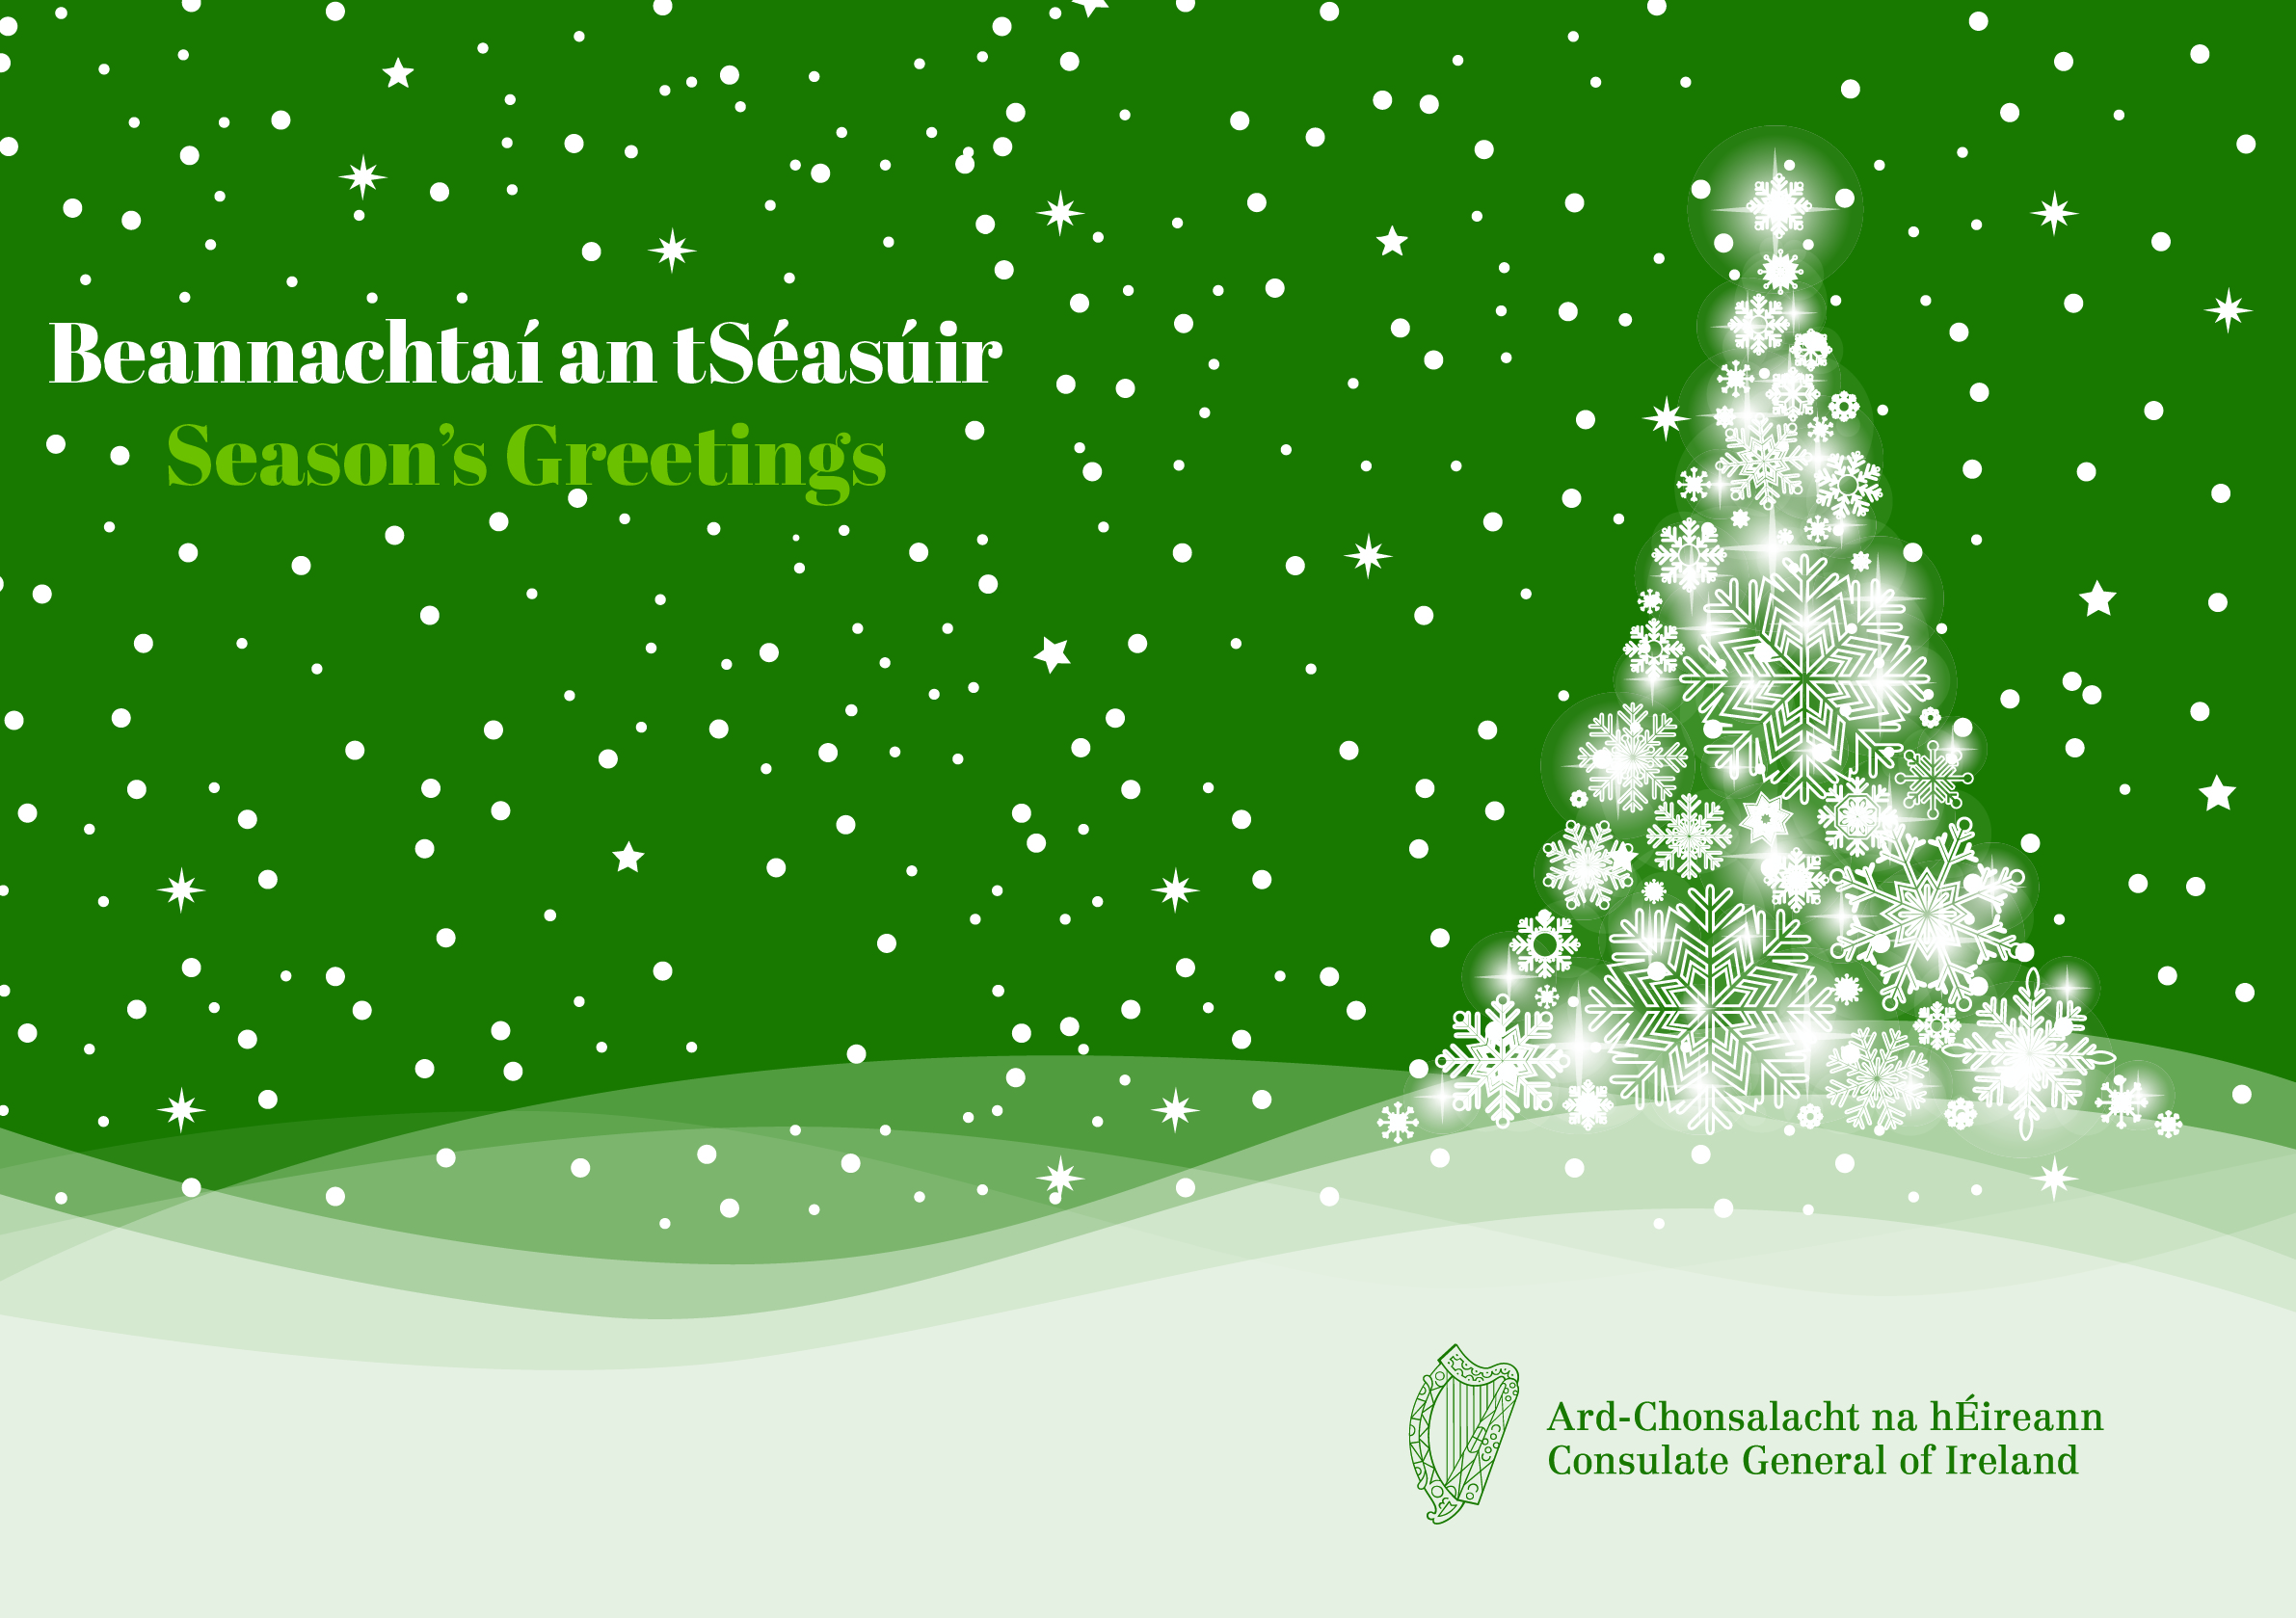 Christmas Greetings from the Consulate General of Ireland